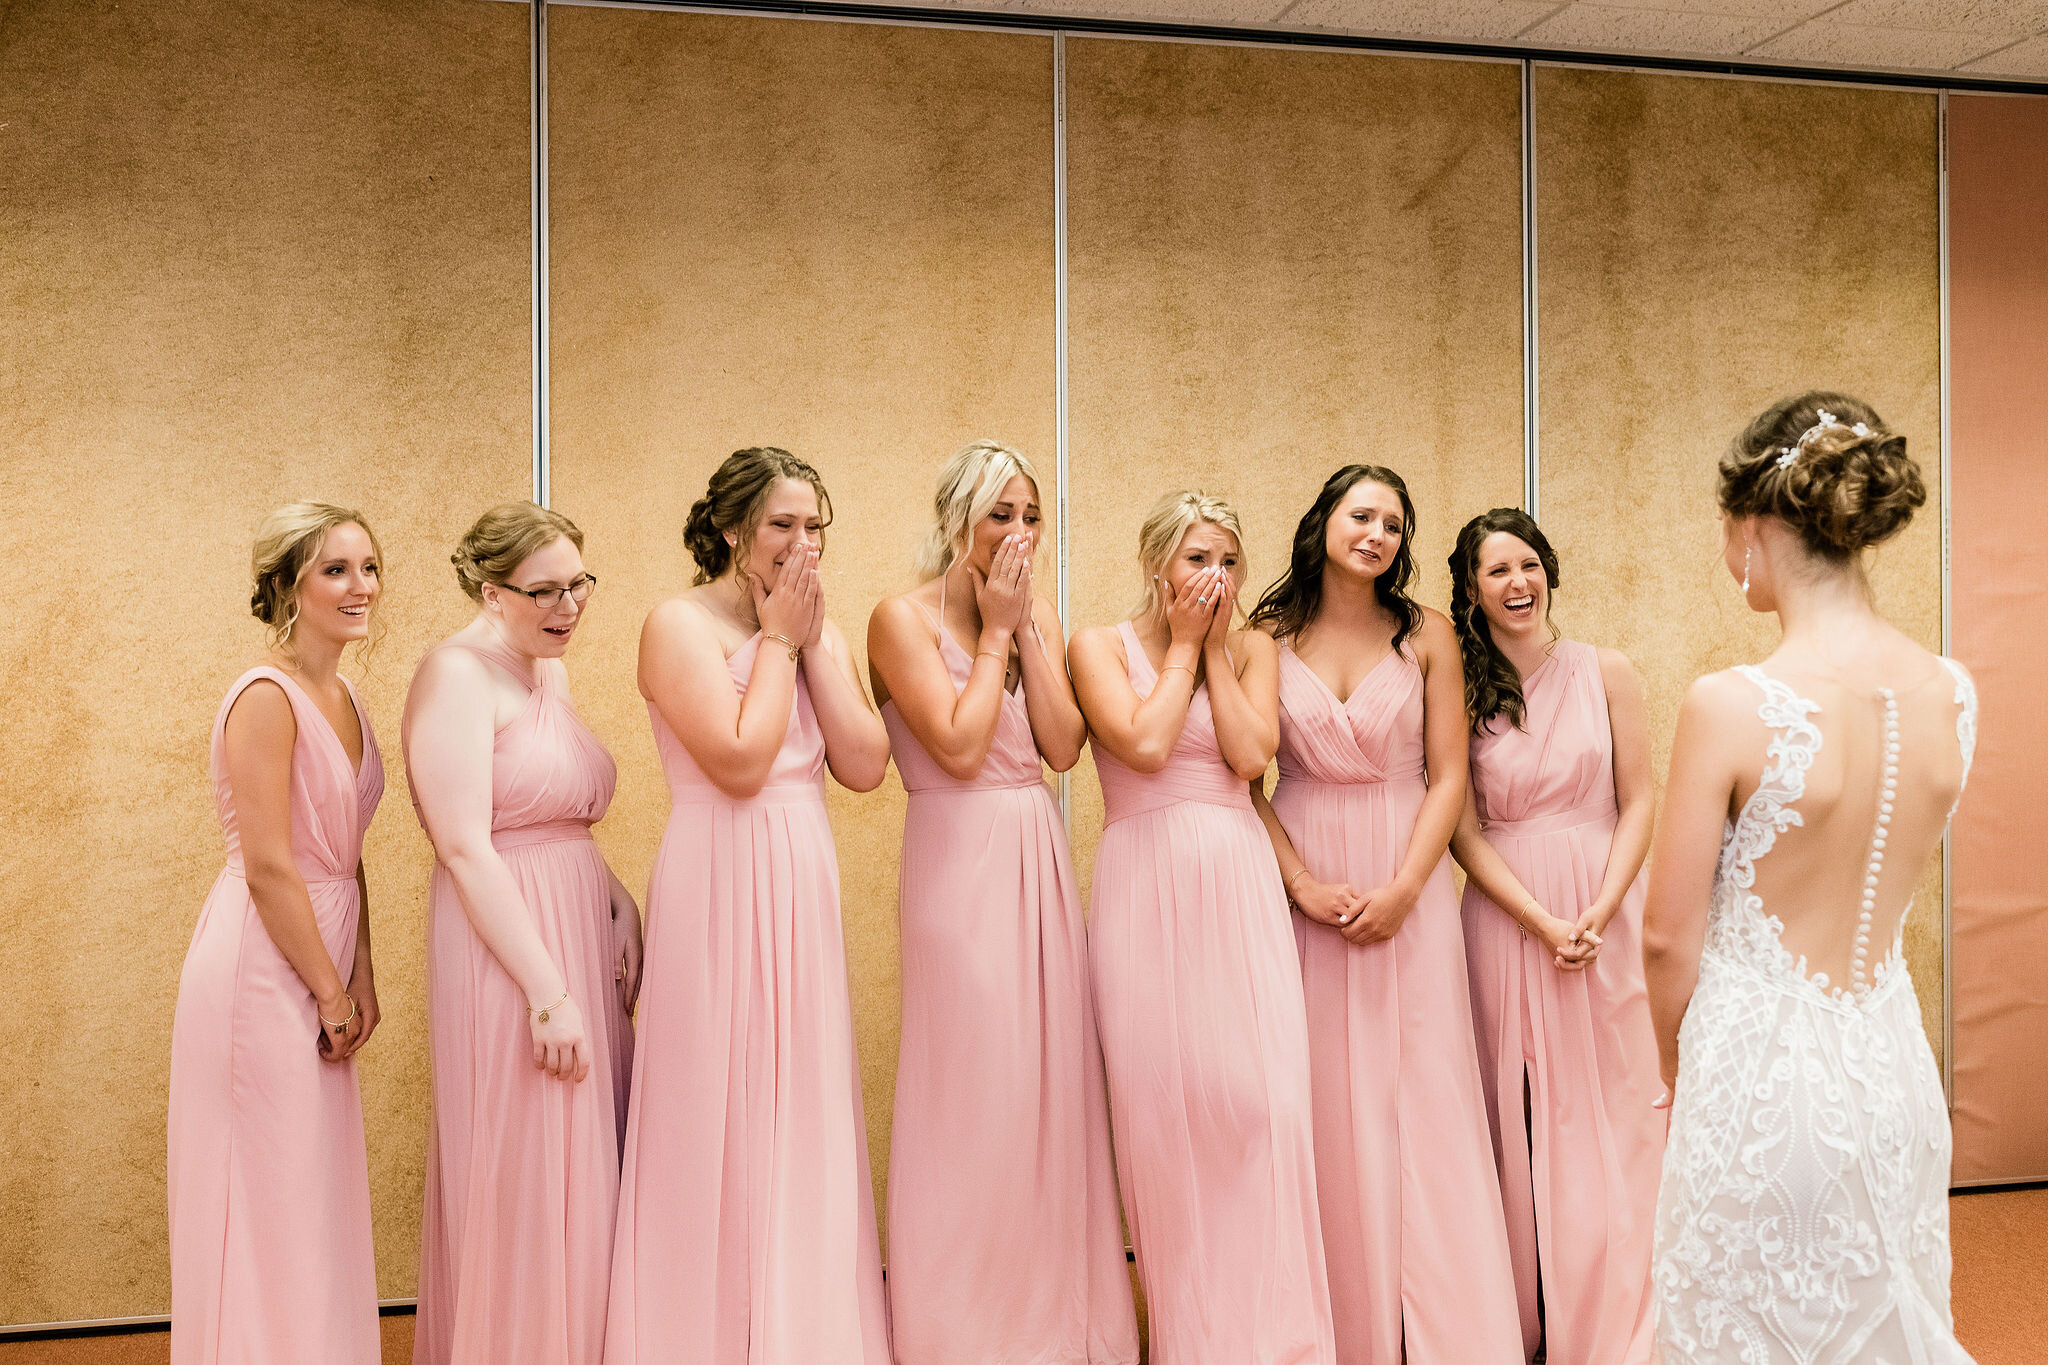 Bride's first look with her bridal party